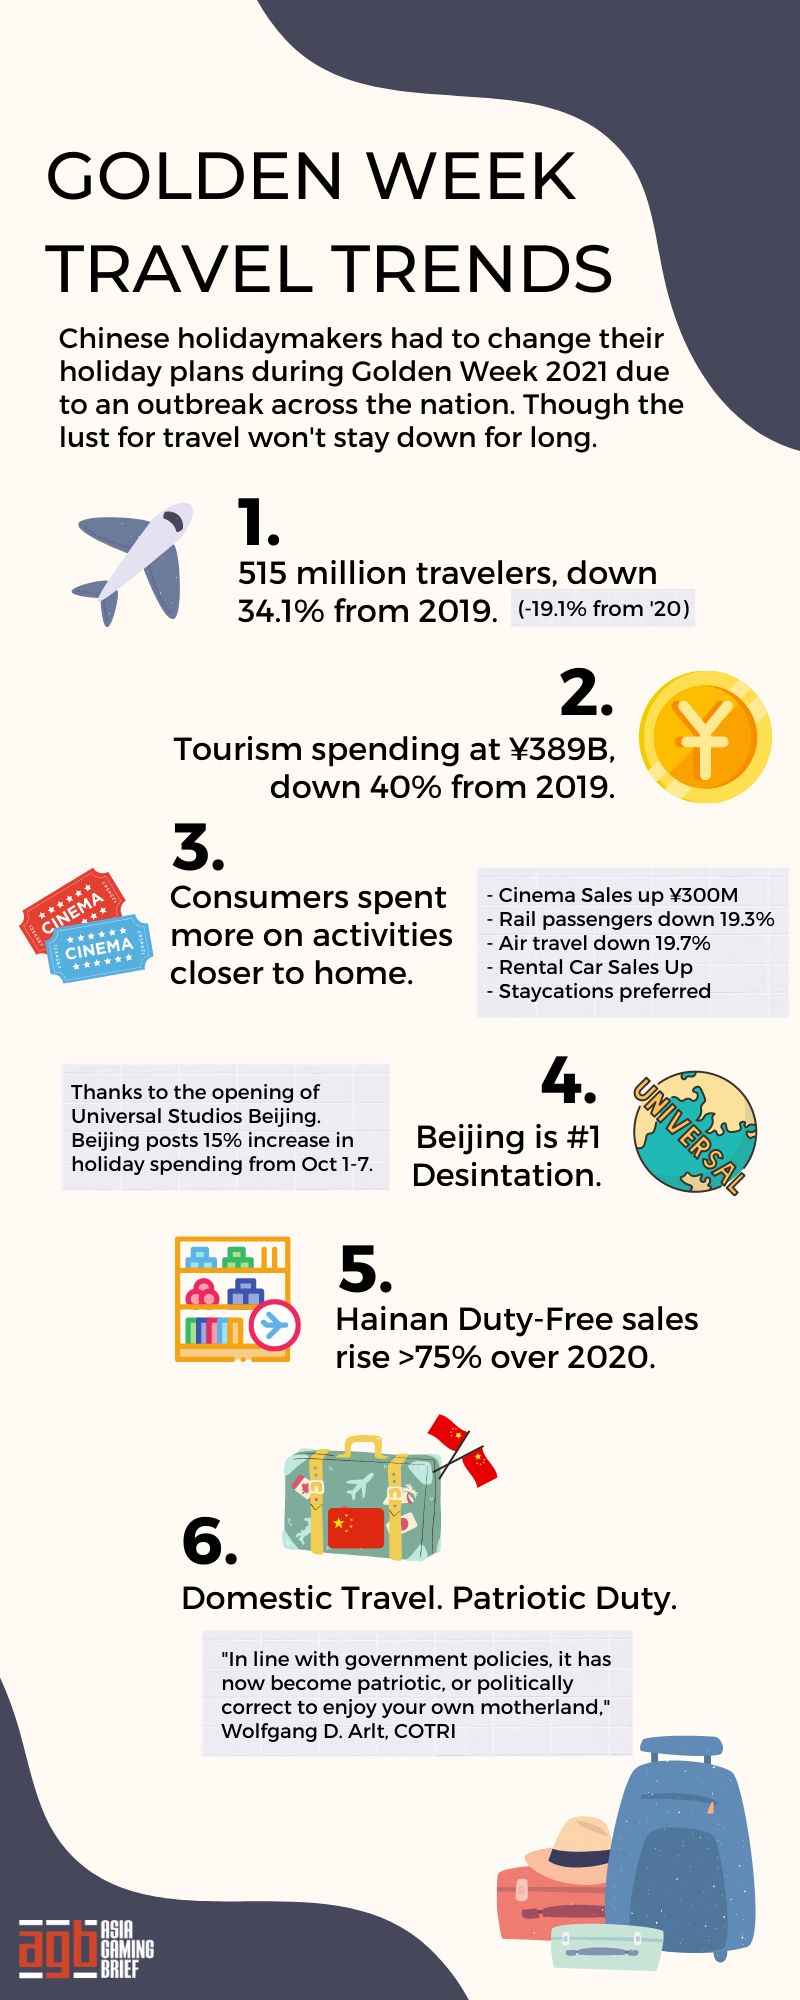 Where did China holiday during Golden Week?